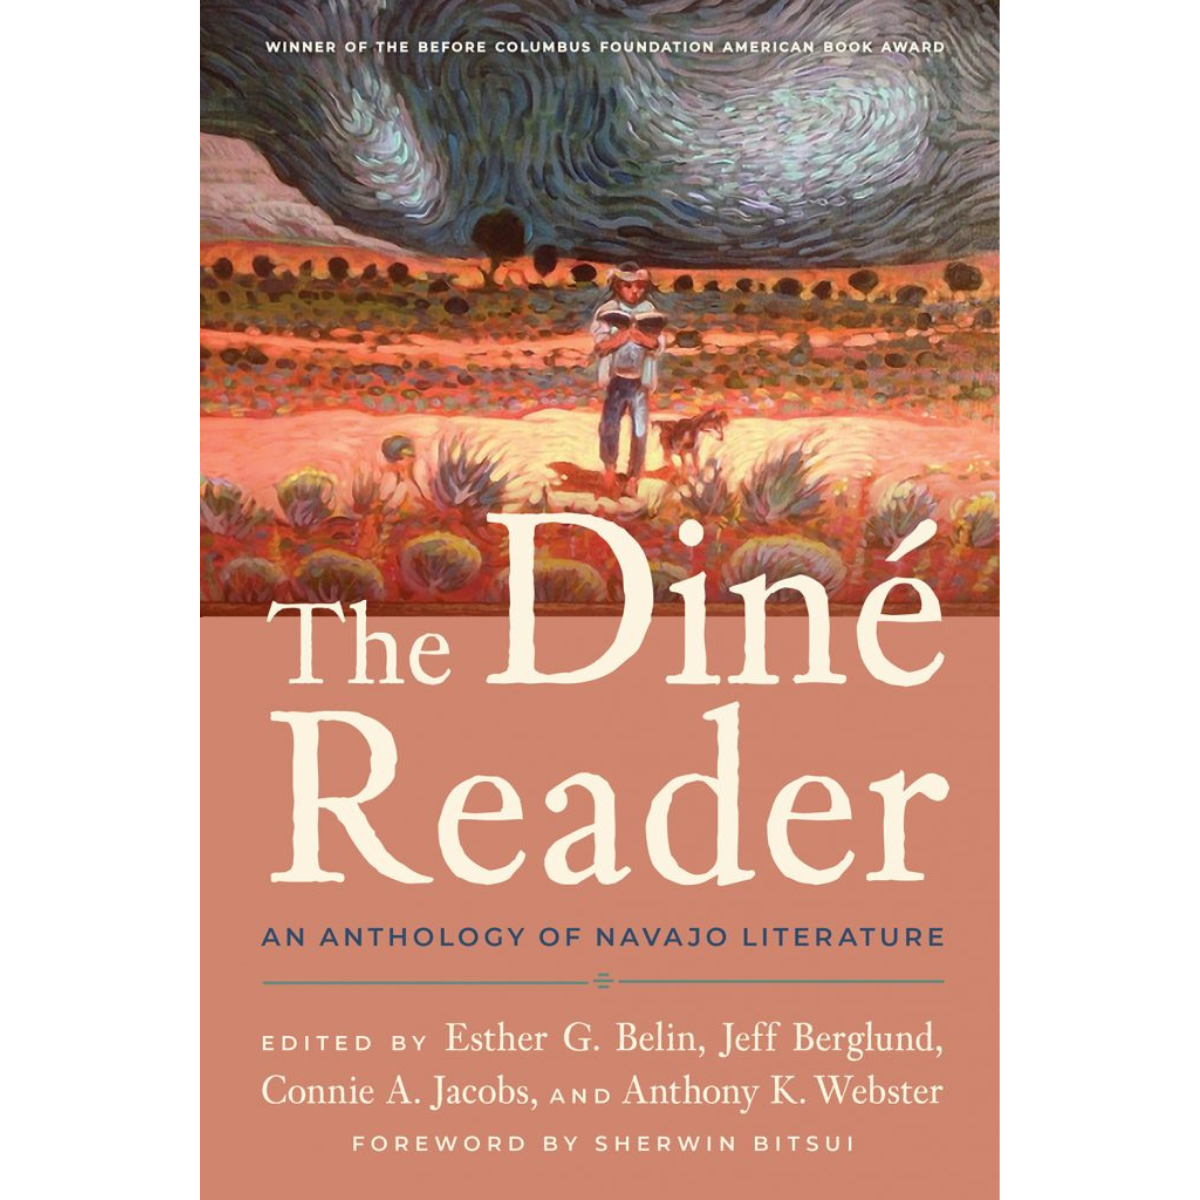 The Diné Reader: An Anthology of Navajo Literature